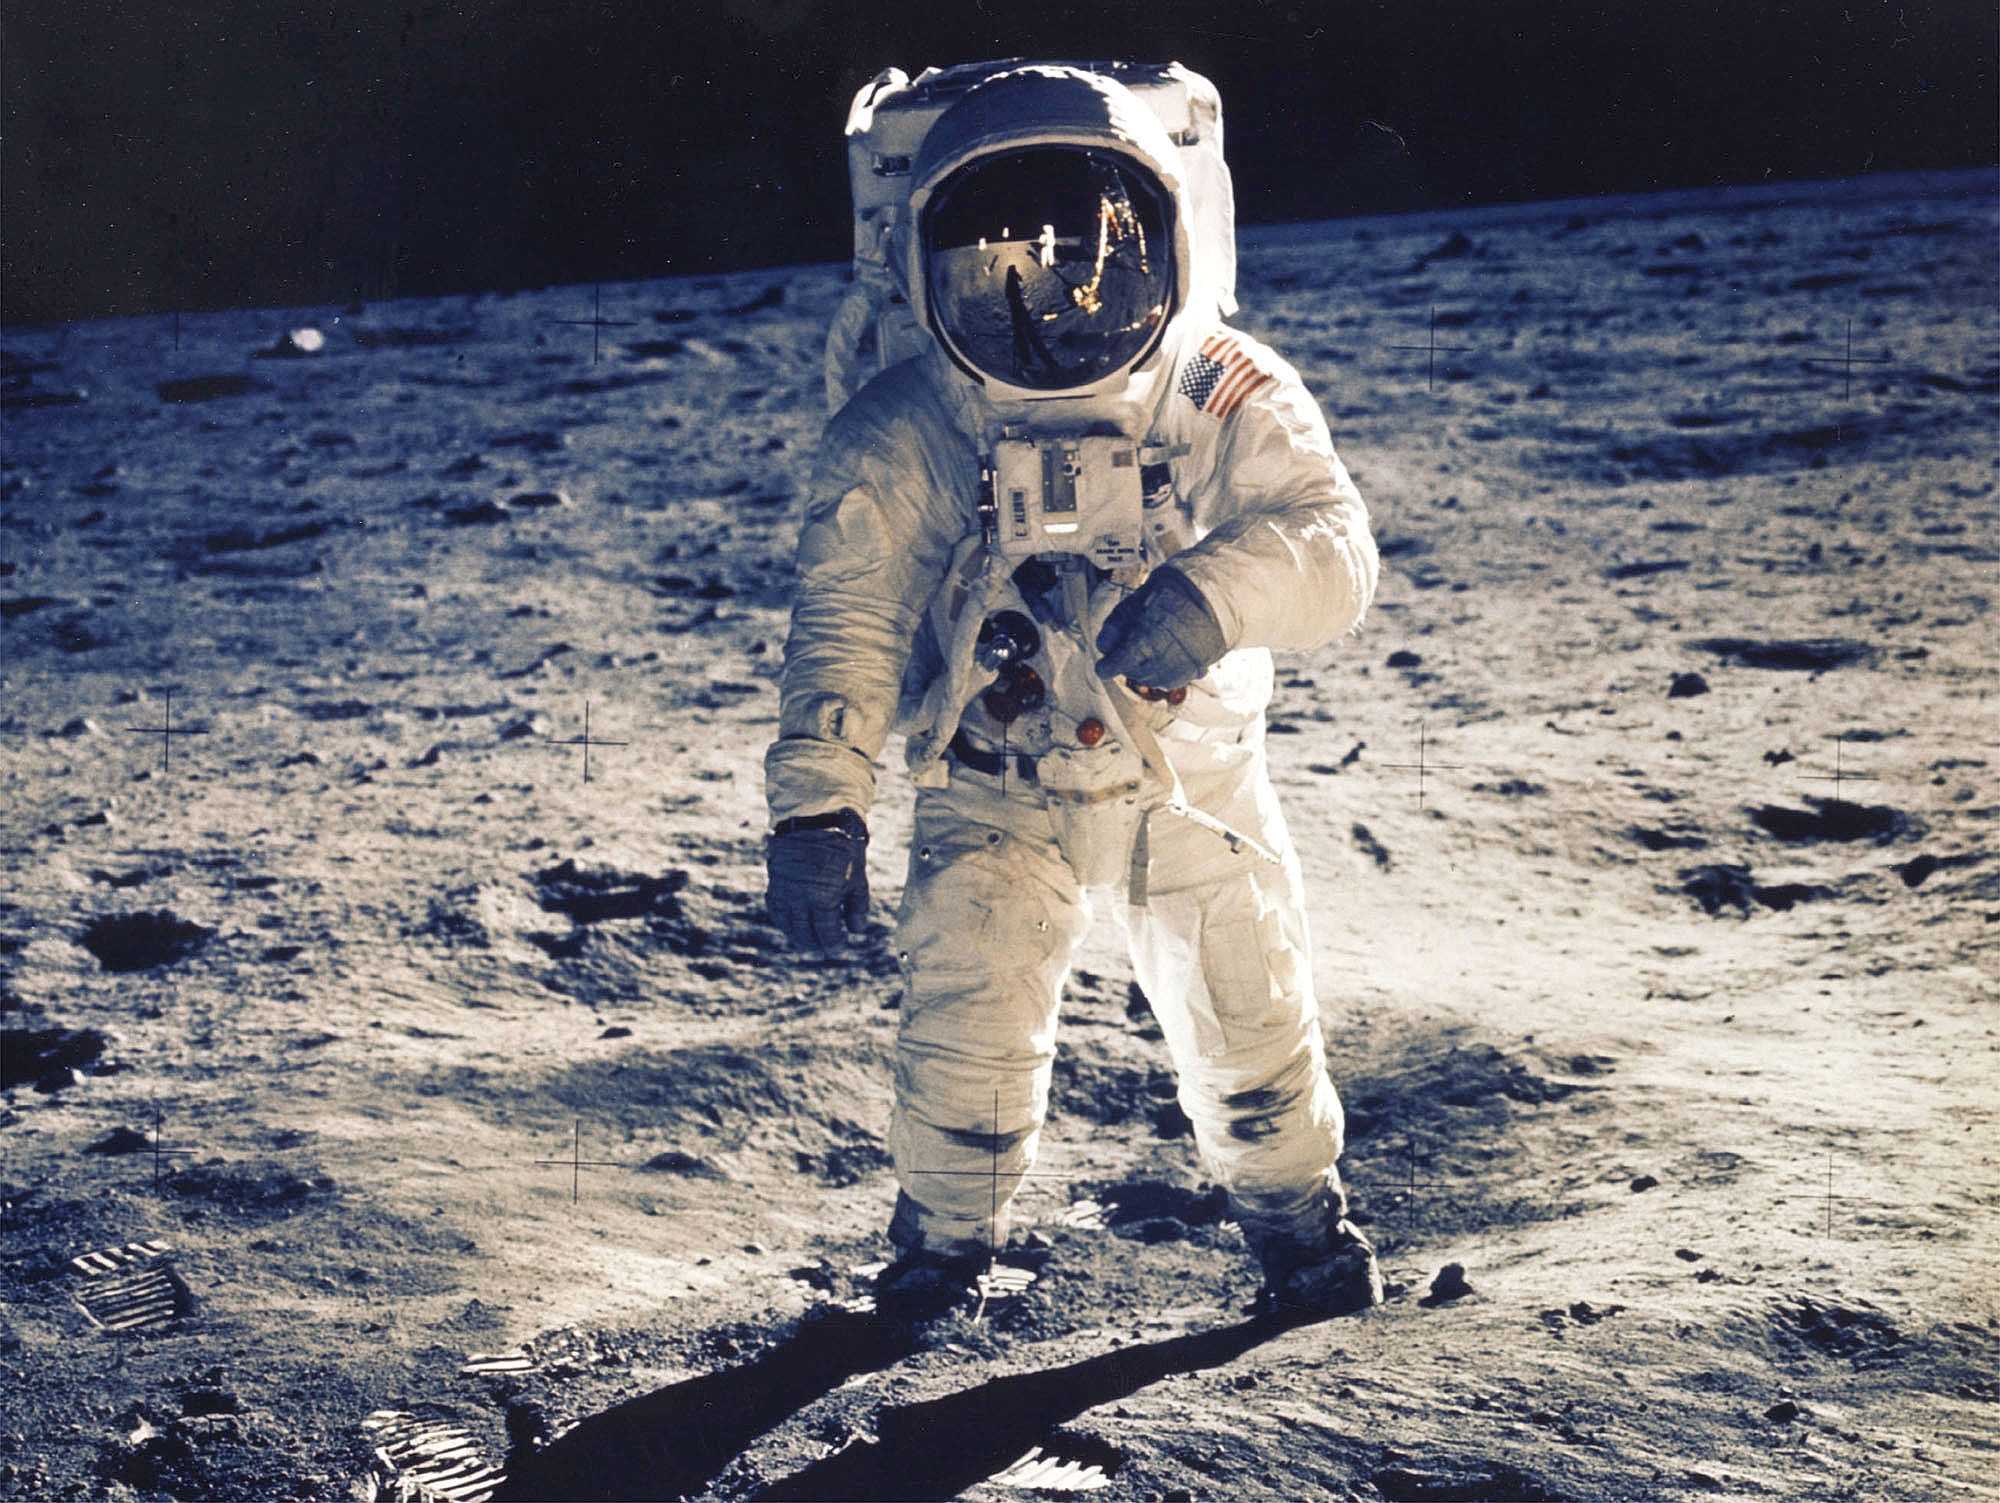 Astronaut Edwin E. Aldrin jr., lunar module pilot, is photographed walking near the lunar module during the Apollo 11 extravehicular activity. Man's first landing on the moon occurred at 4:17 p.m. July 20, 1969 as lunar module "Eagle" touched down gently on the sea of tranquility on the East side of the moon. 